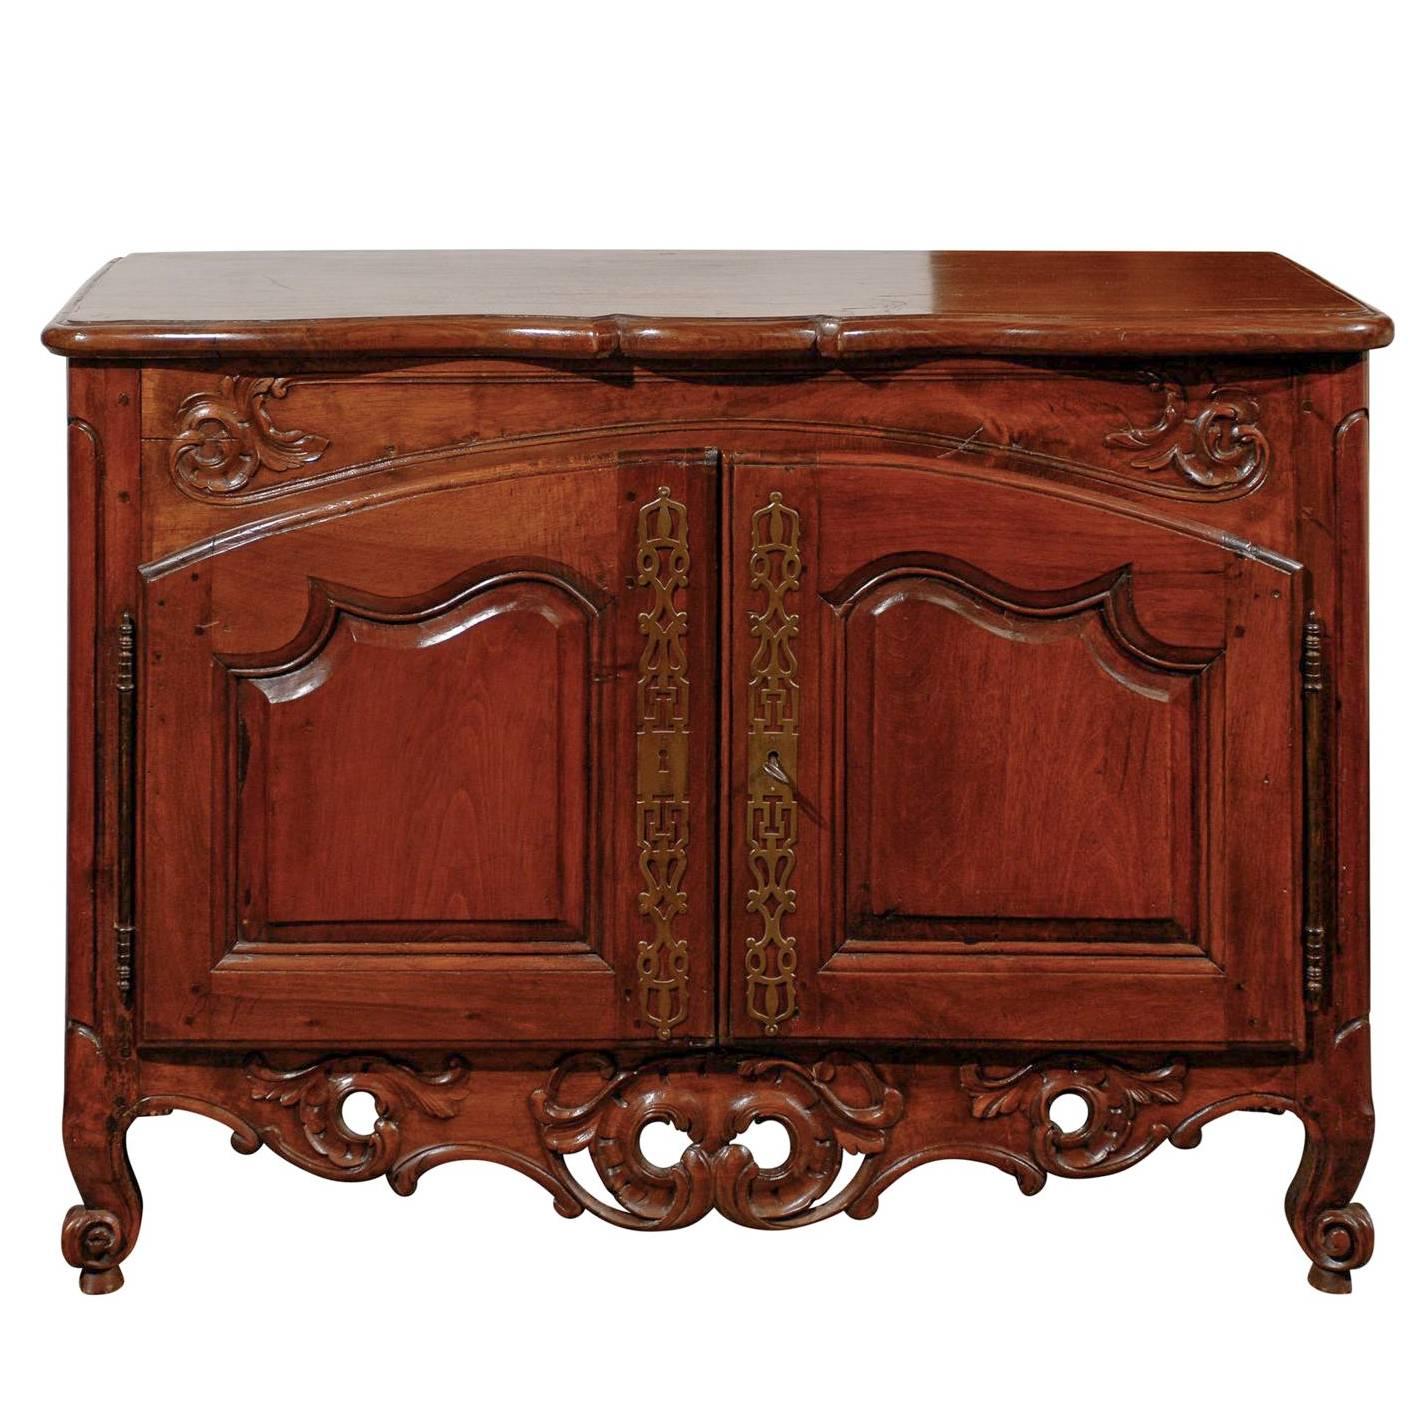 Period Regence French 1720s Walnut Two-Door Buffet with Carved and Pierced Skirt